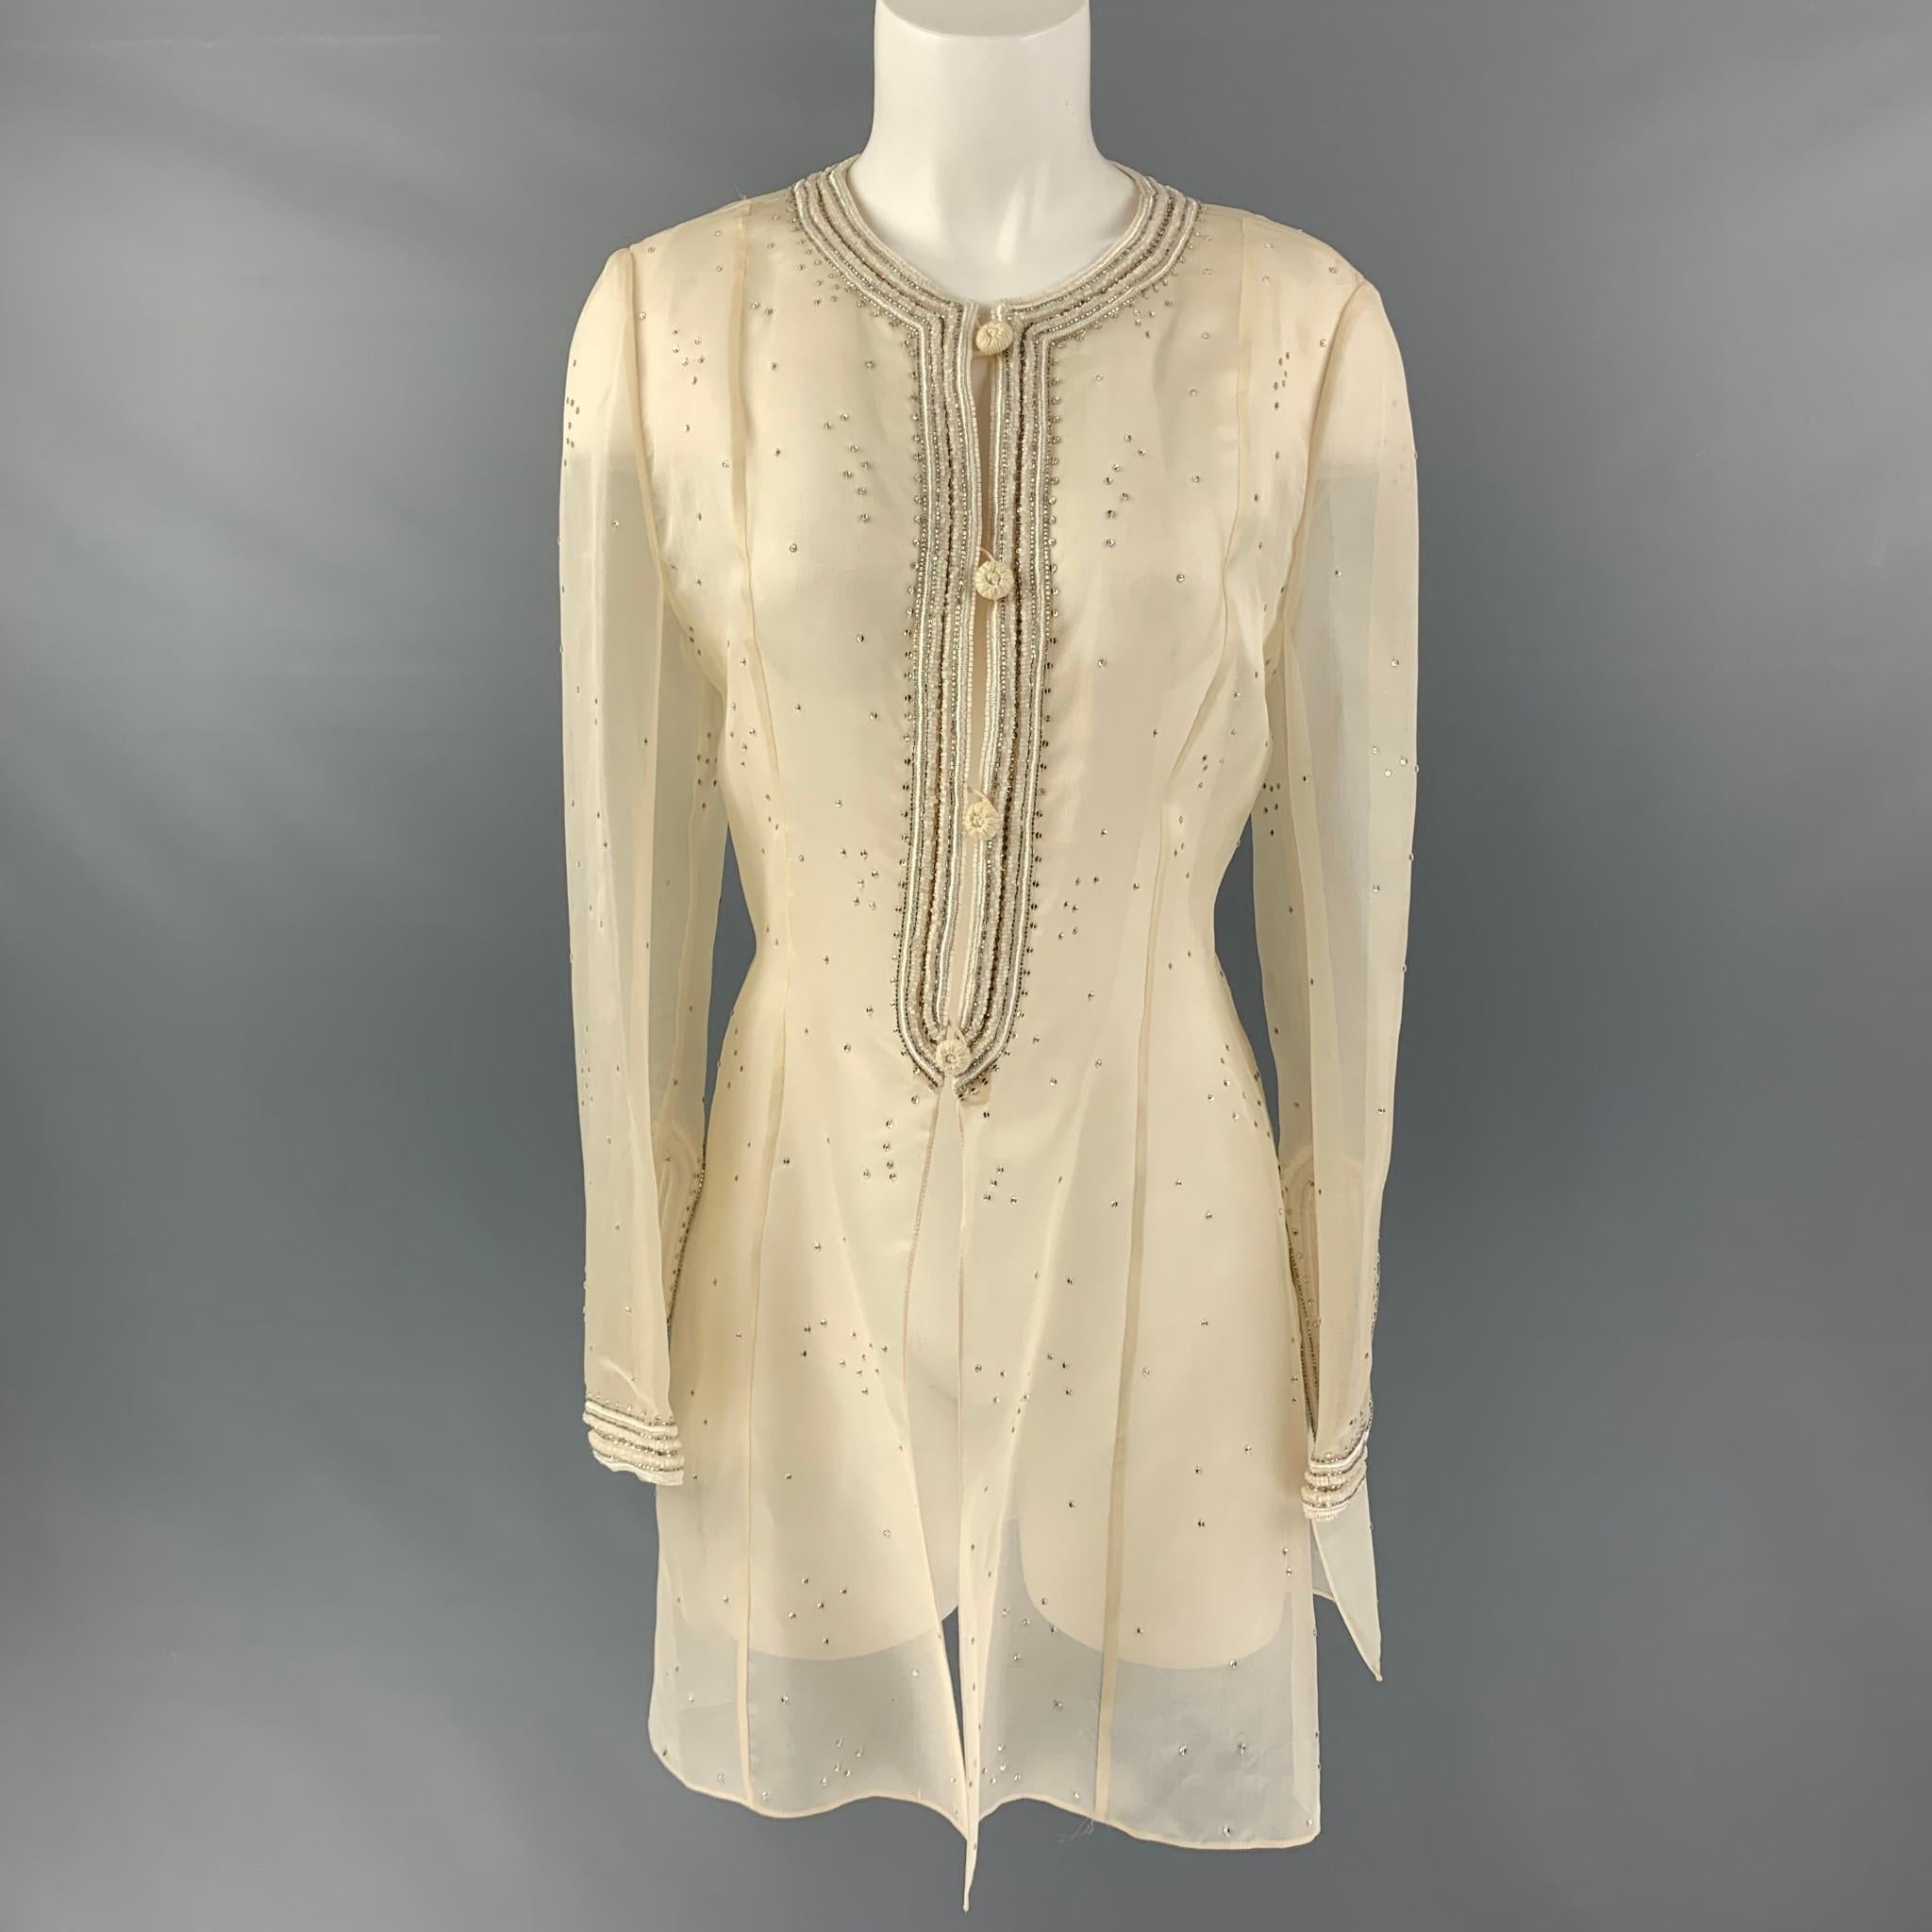 OSCAR DE LA RENTA tunic dress comes in cream silk fabric featuring a beaded embroidery details, long sleeve and button closure. Made in USA.

Very Good Pre-Owned Condition. Minor Signs of Wear.
Marked: no size marked

Measurements:

Shoulder: 14